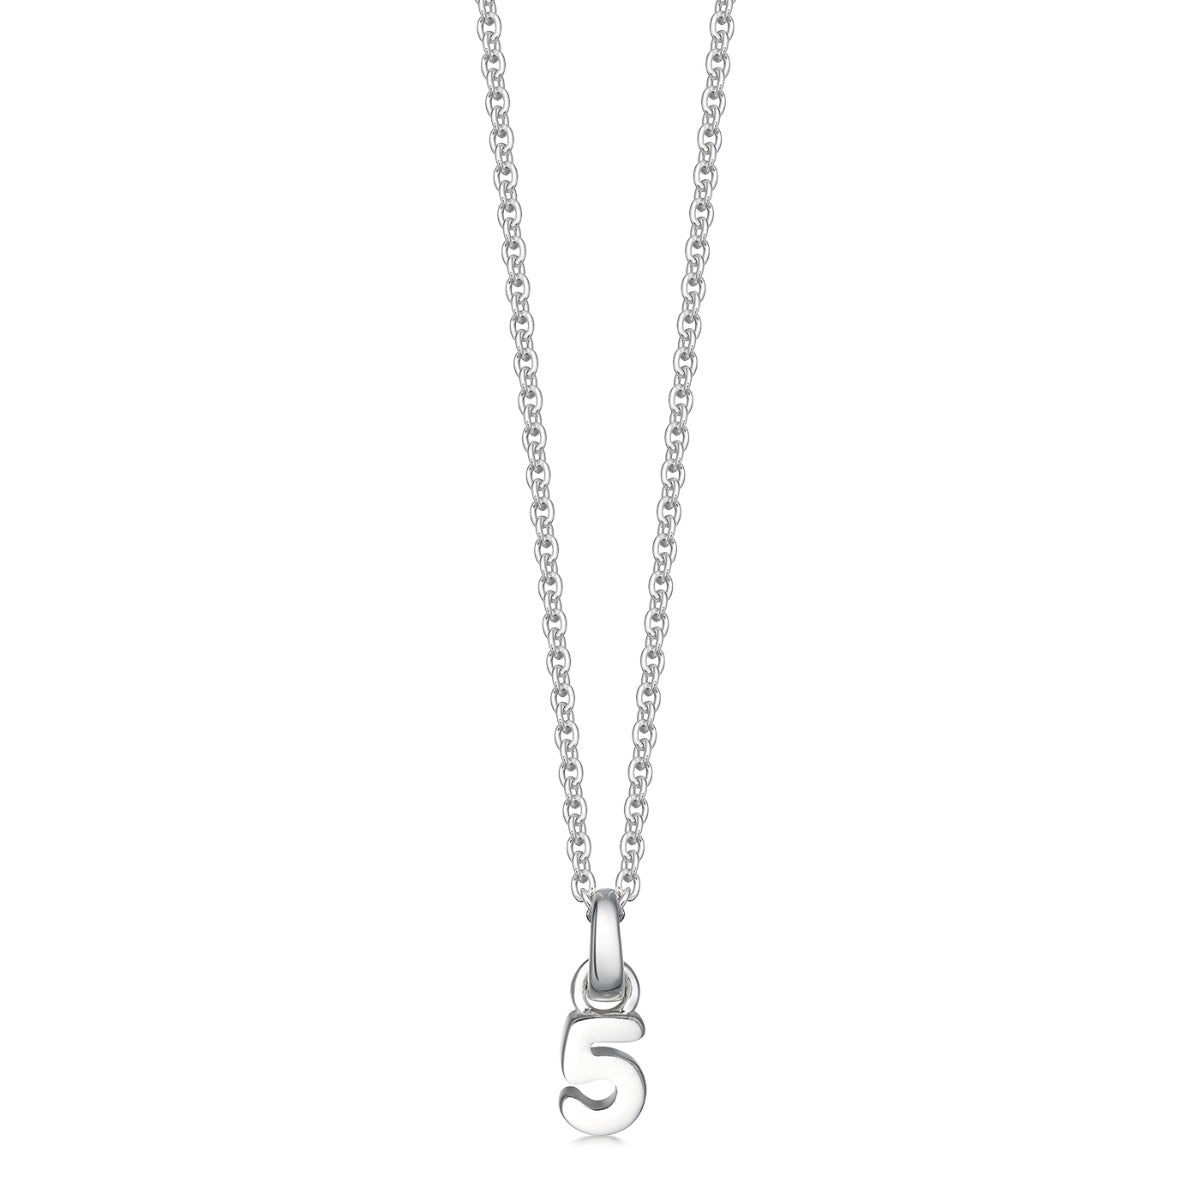 Silver Number 5 Pendant Necklace | |Hersey & Son Silversmiths